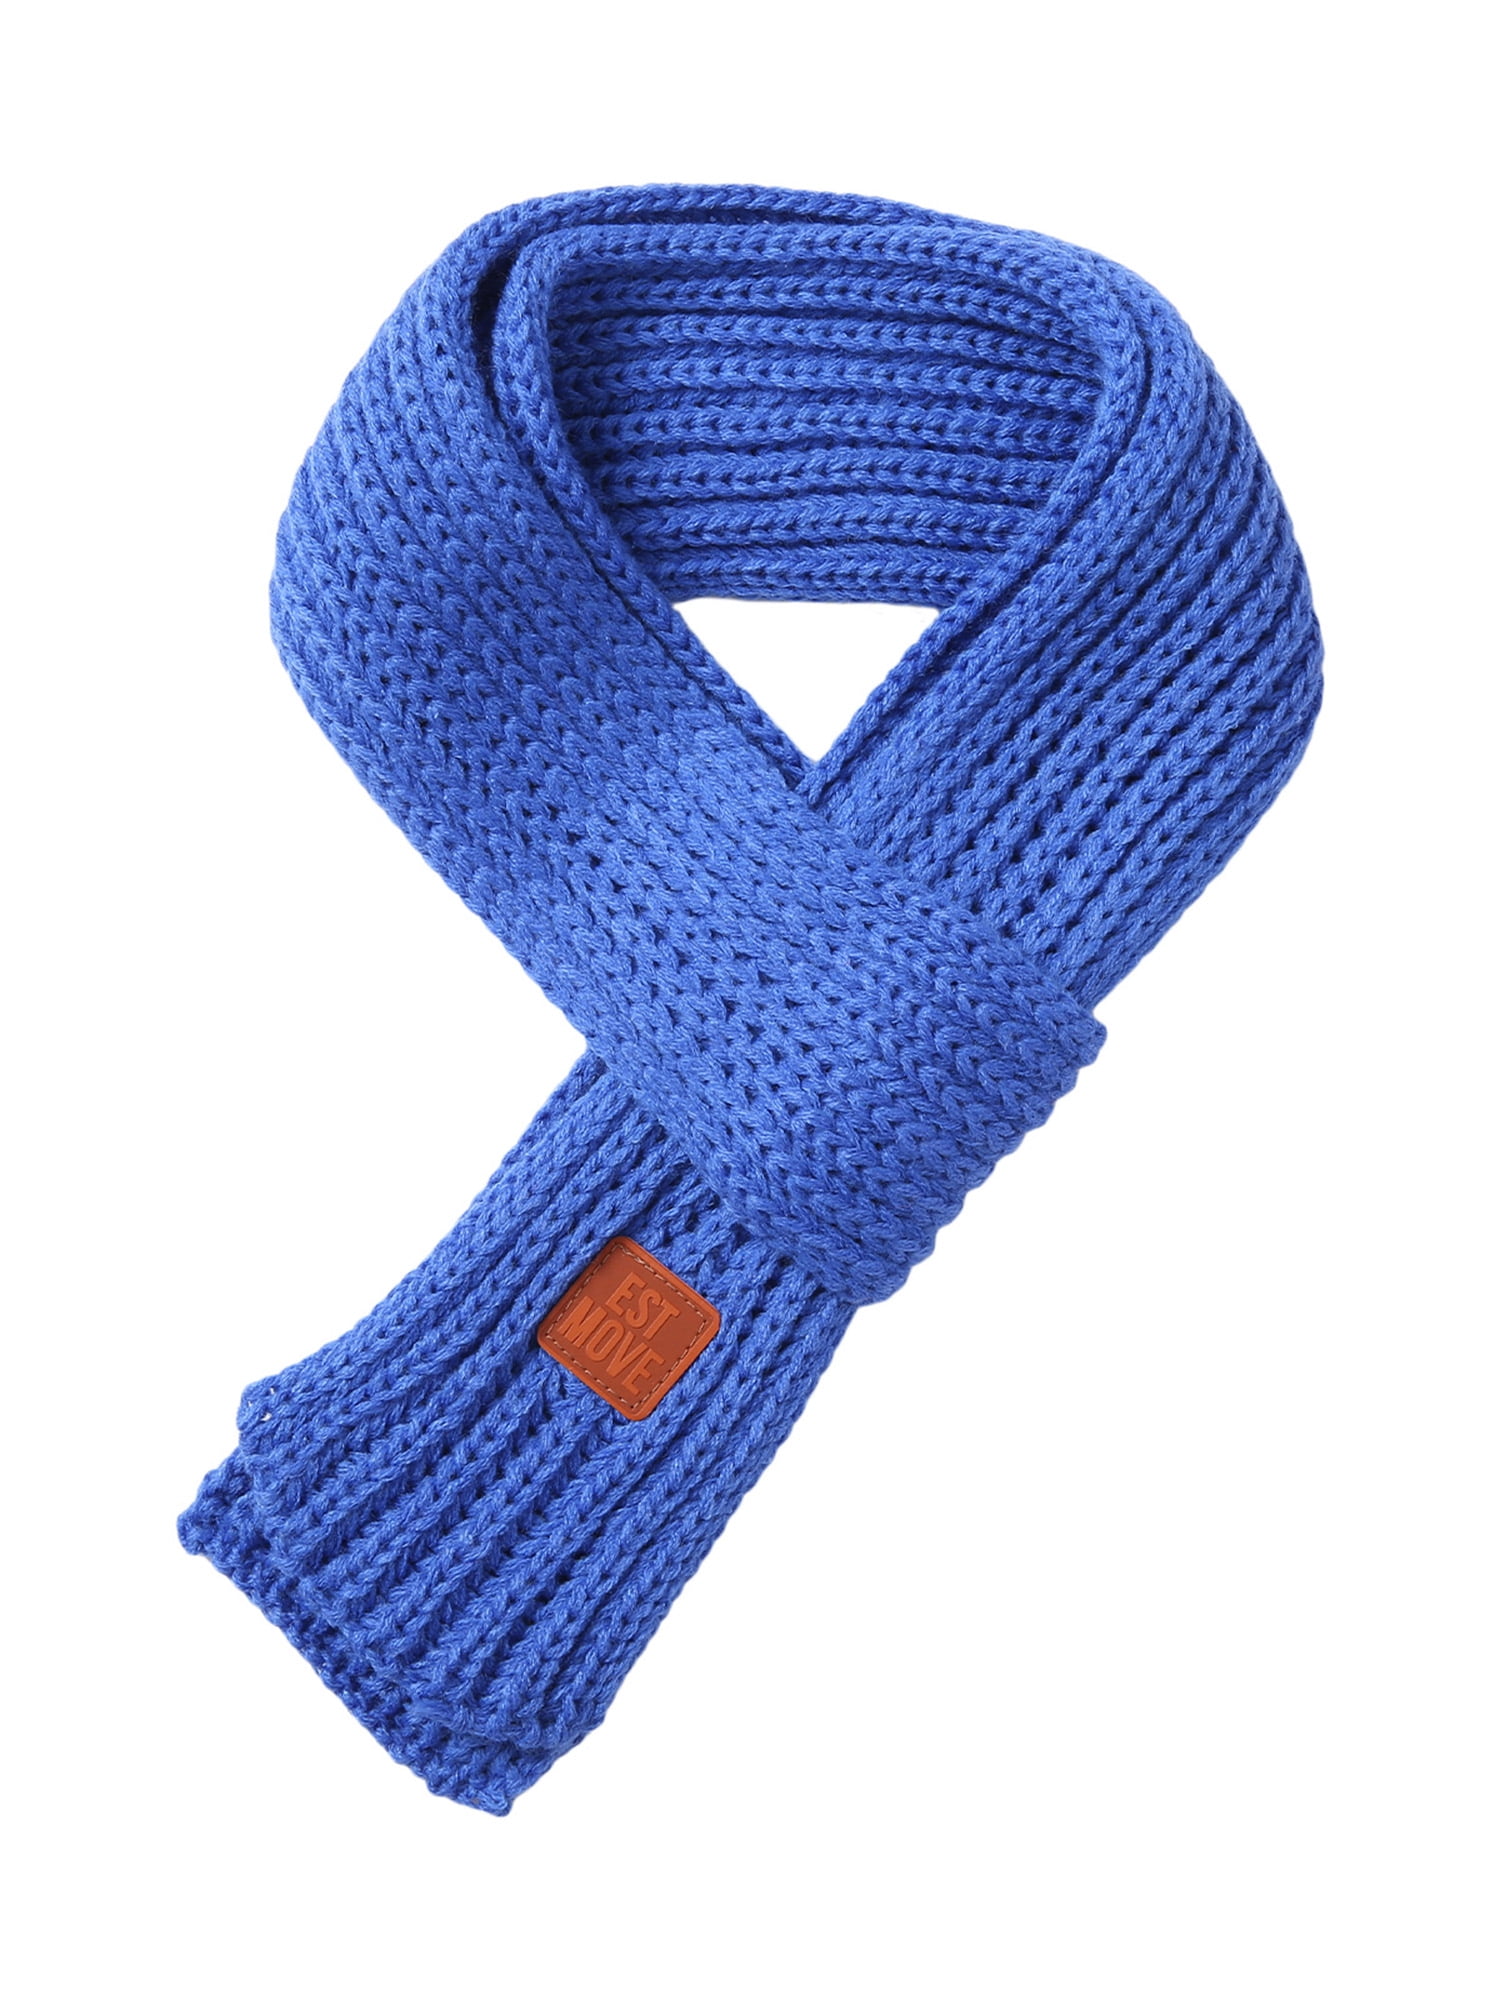 Kids Winter Knitted Warm Scarf Boys Girls Toddlers Solid Color Soft Scarfs Neck Warmer